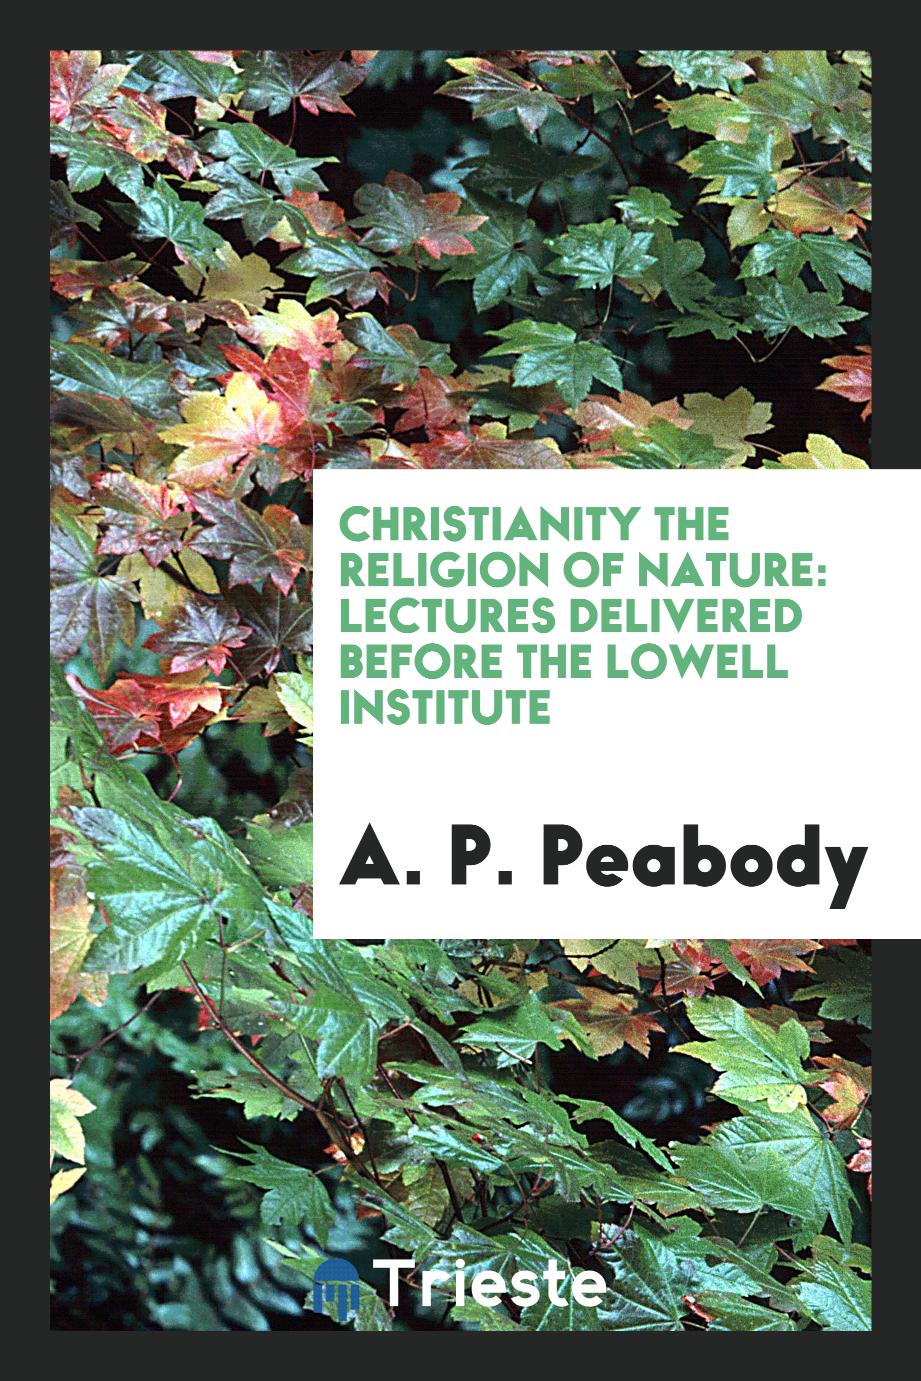 Christianity the Religion of Nature: Lectures Delivered Before the Lowell Institute